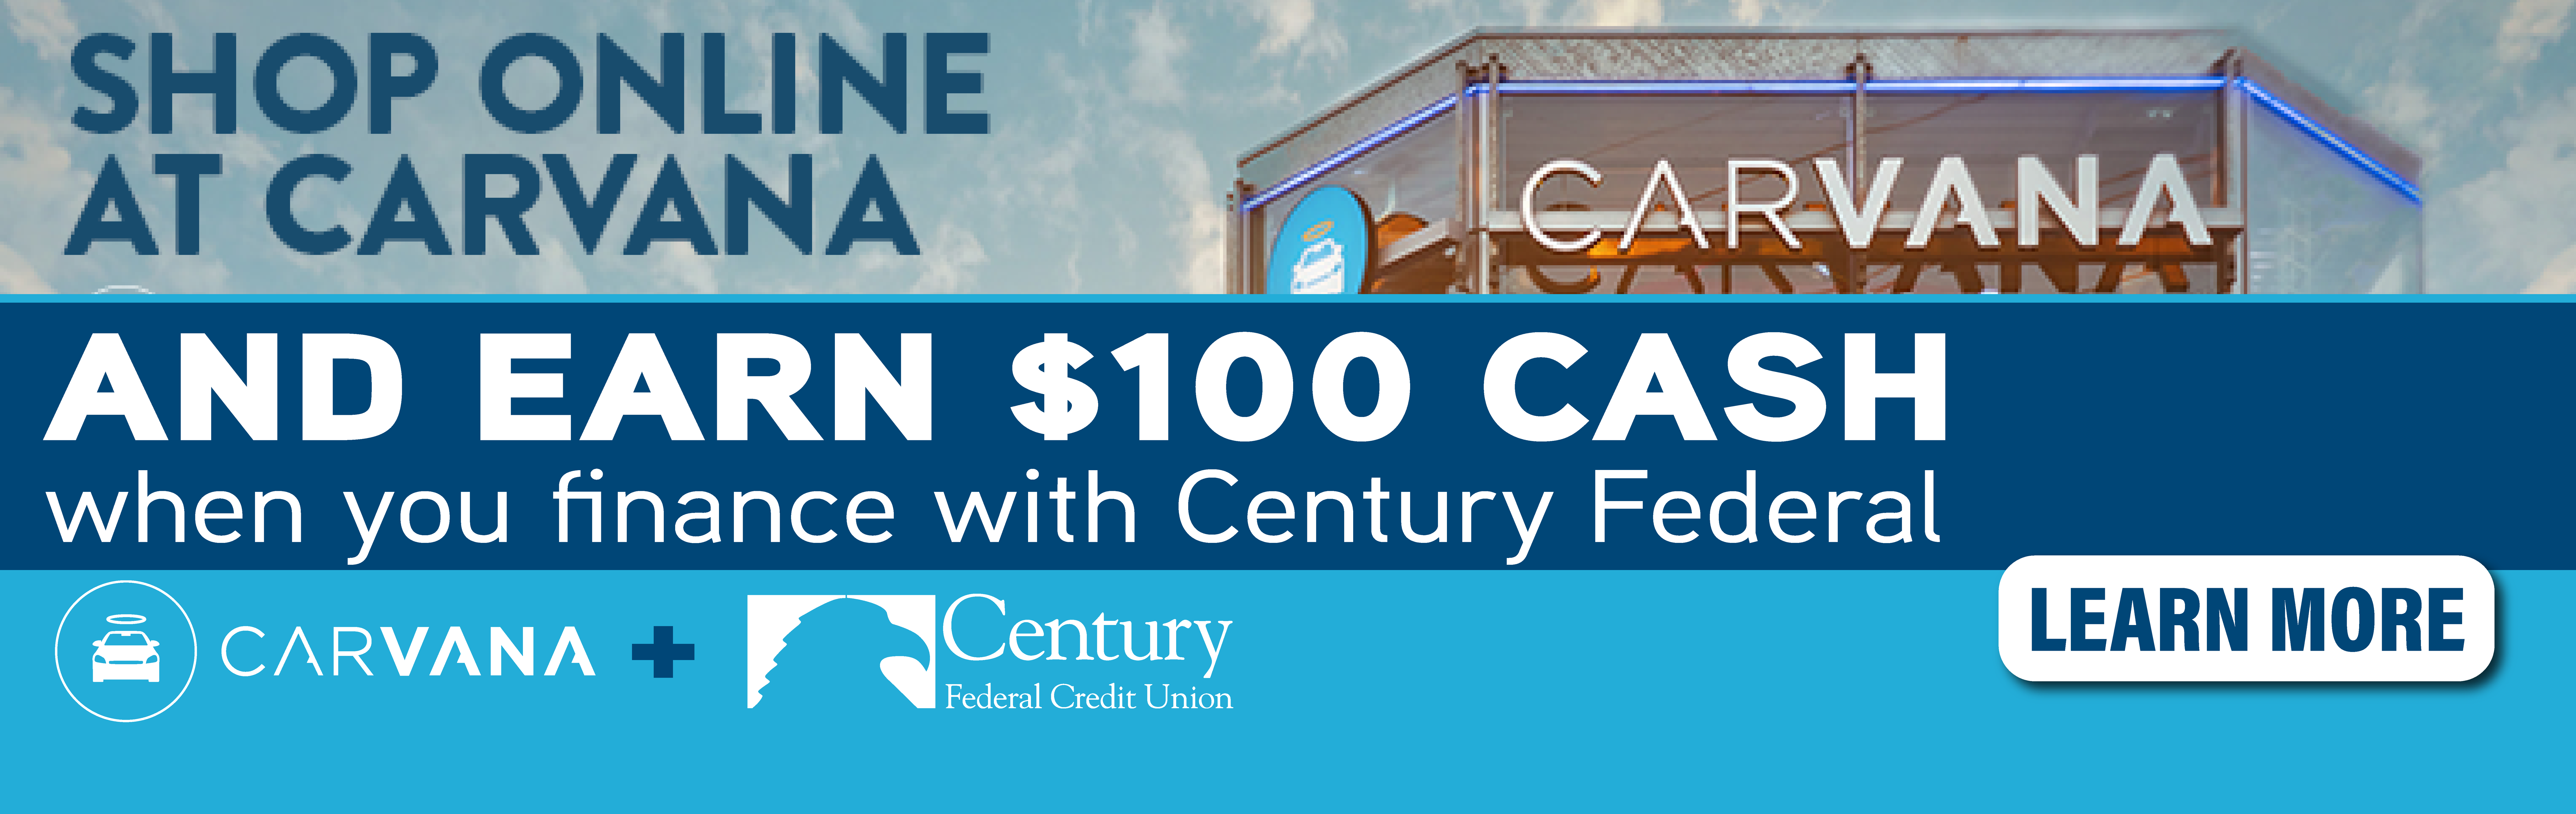 Shop online at Carvana and earn $100 cash when you finance with Century Federal Learn More